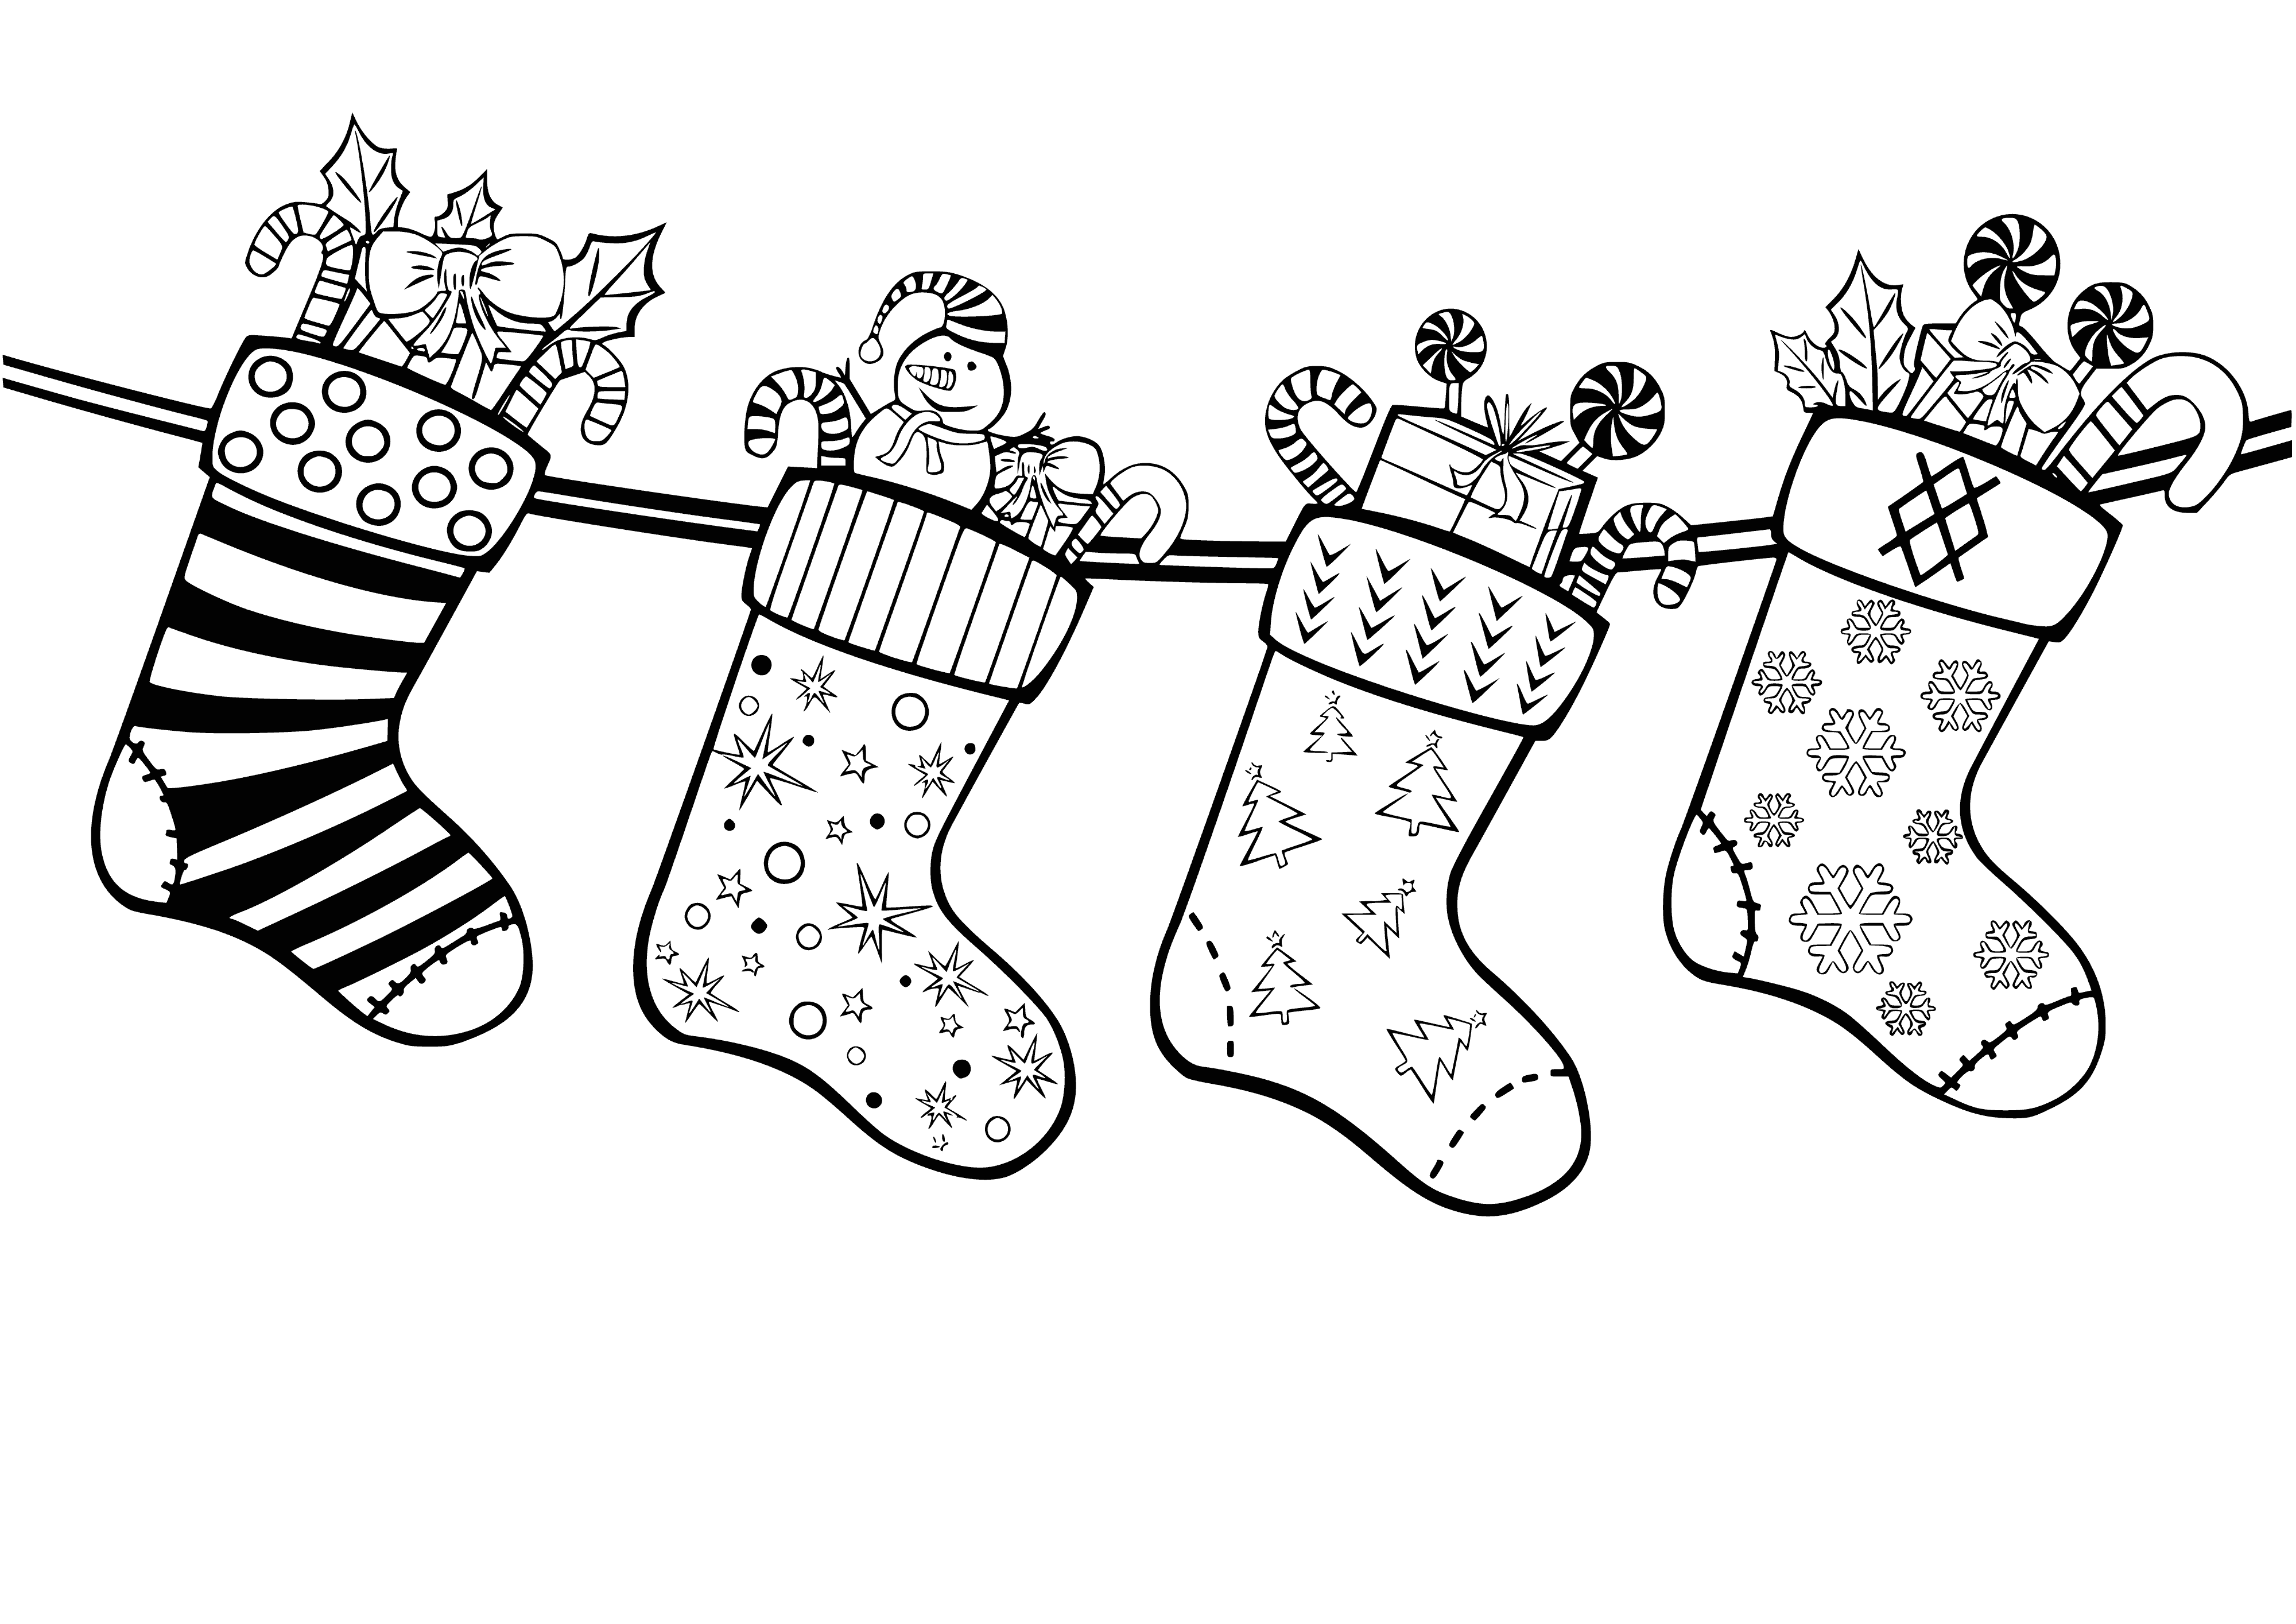 coloring page: Christmas socks are festive red socks with white cuffs and snowflake designs! #HappyHolidays